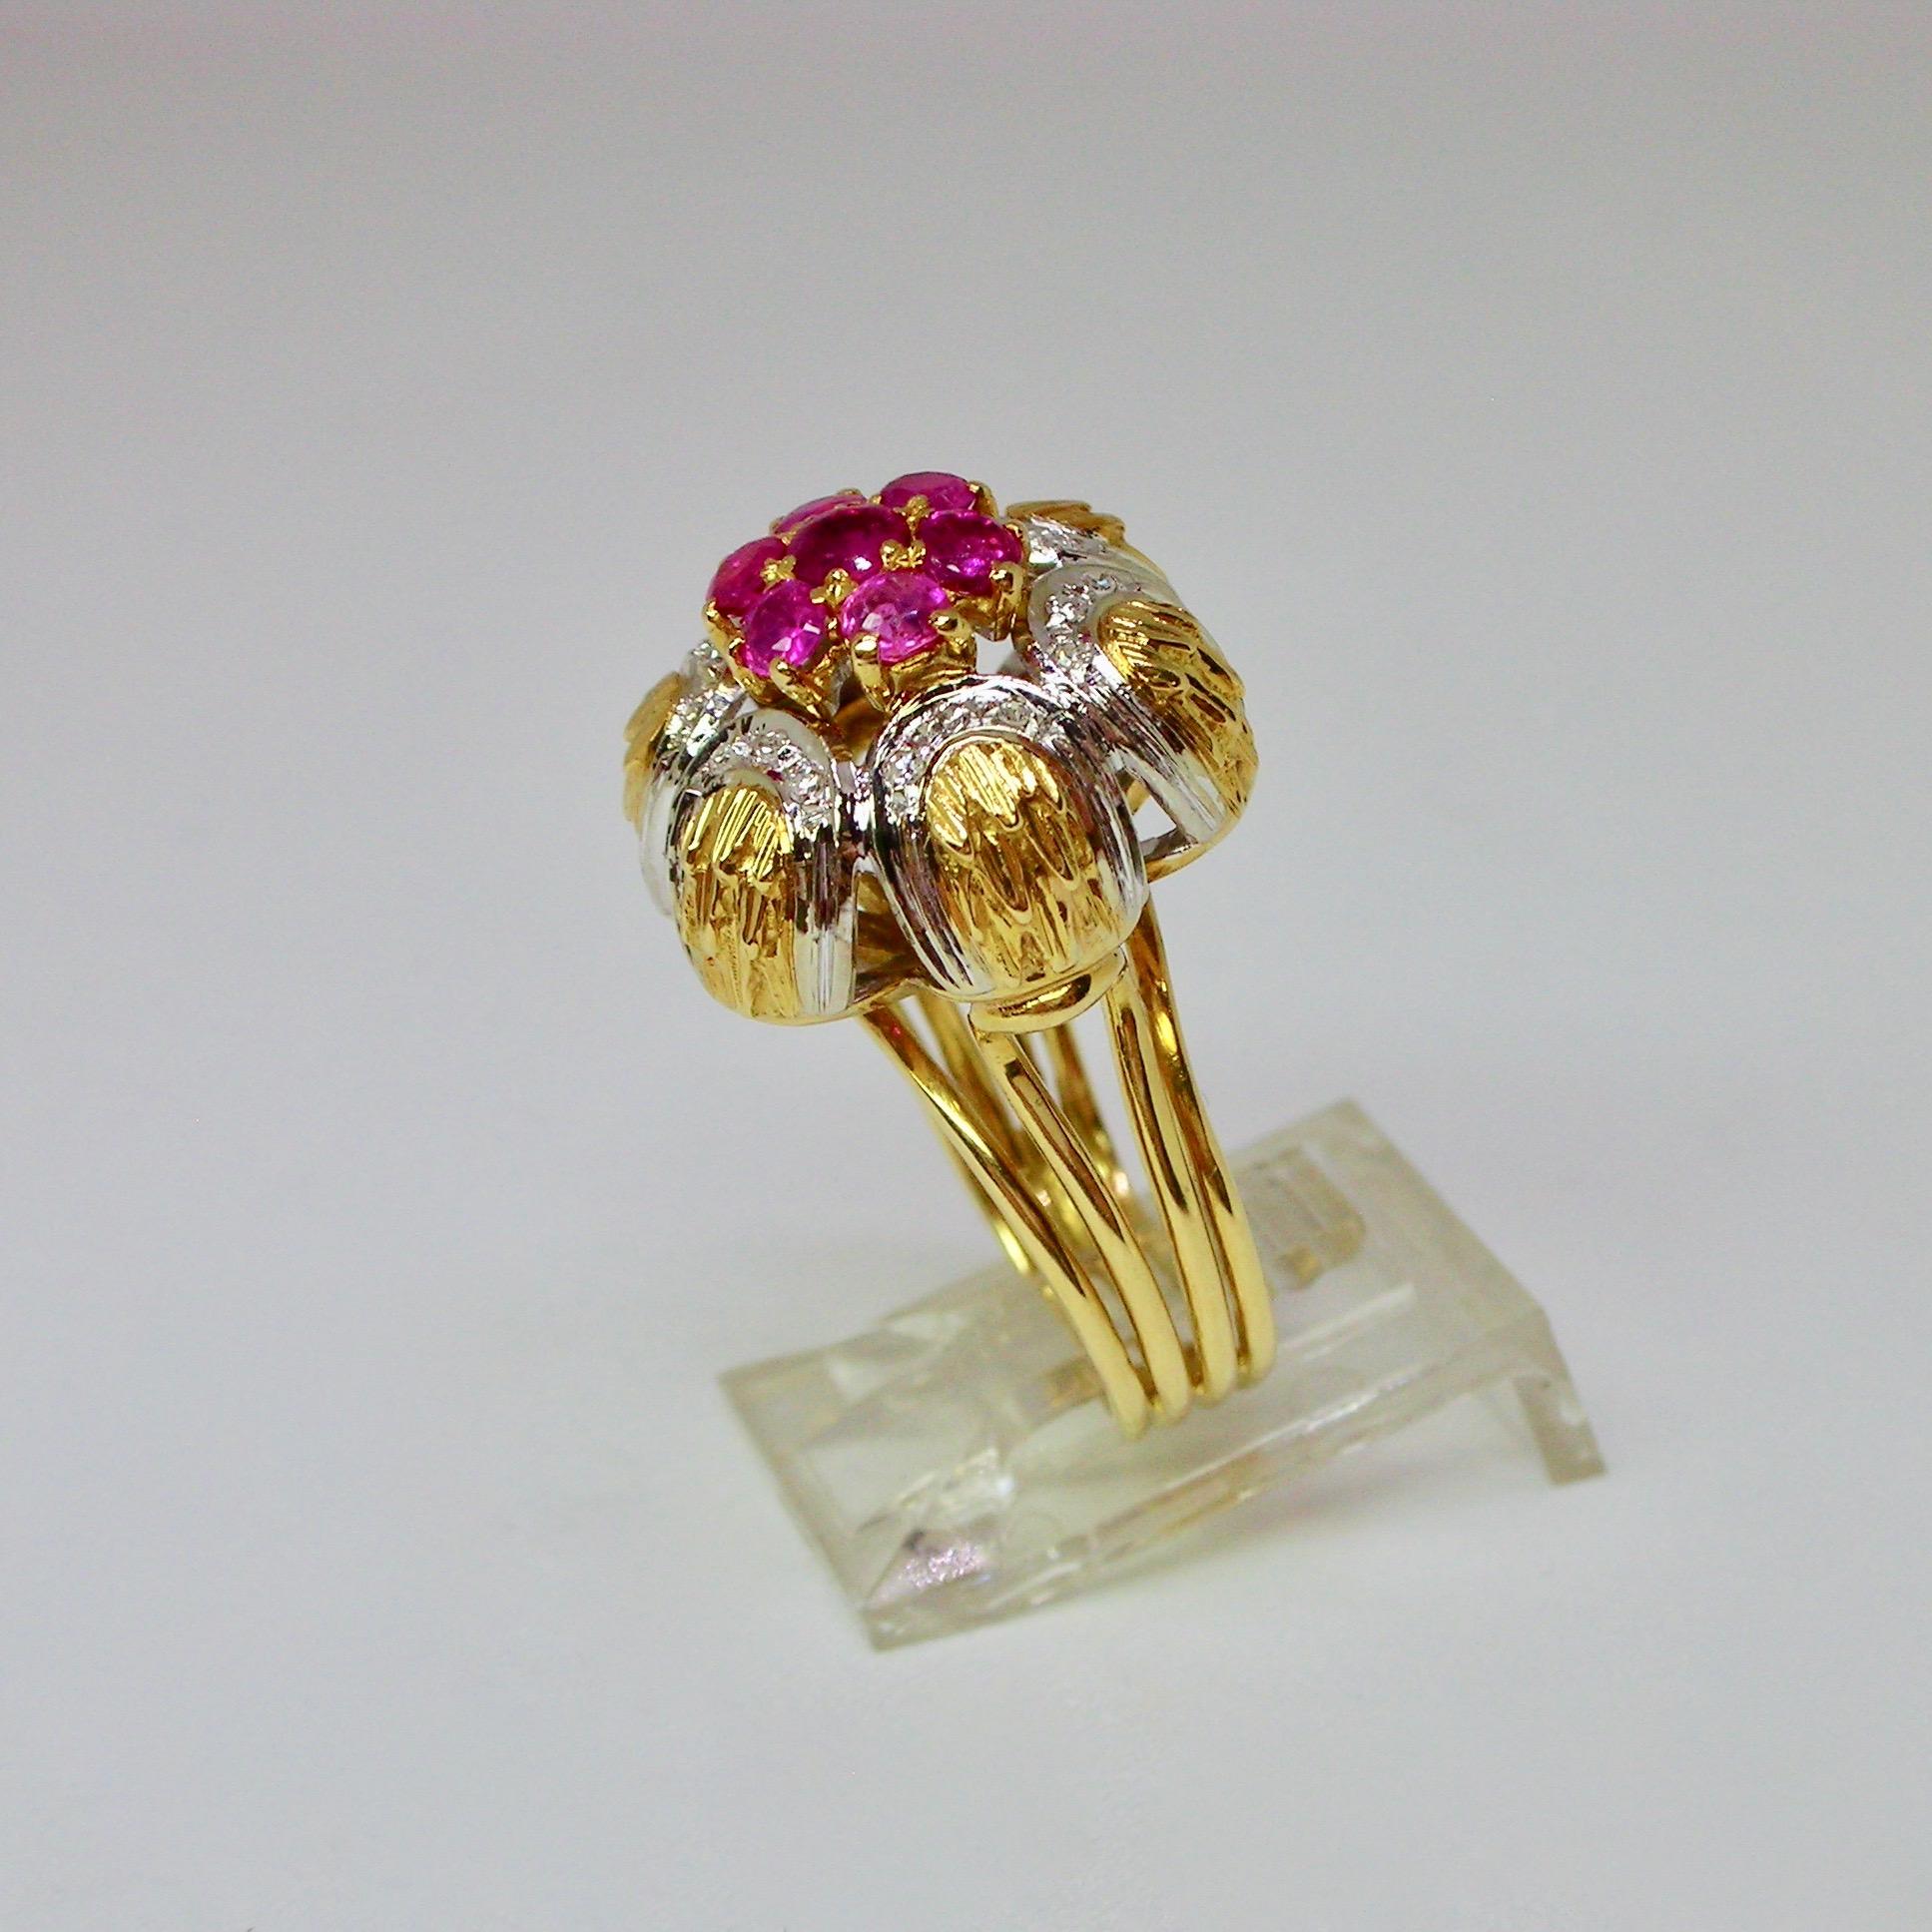 Floral cocktail ring set in 18ct two tone gold with natural rubies of around 0.50ct total and small contouring diamonds, 1960s period circa stamped ITALY. 